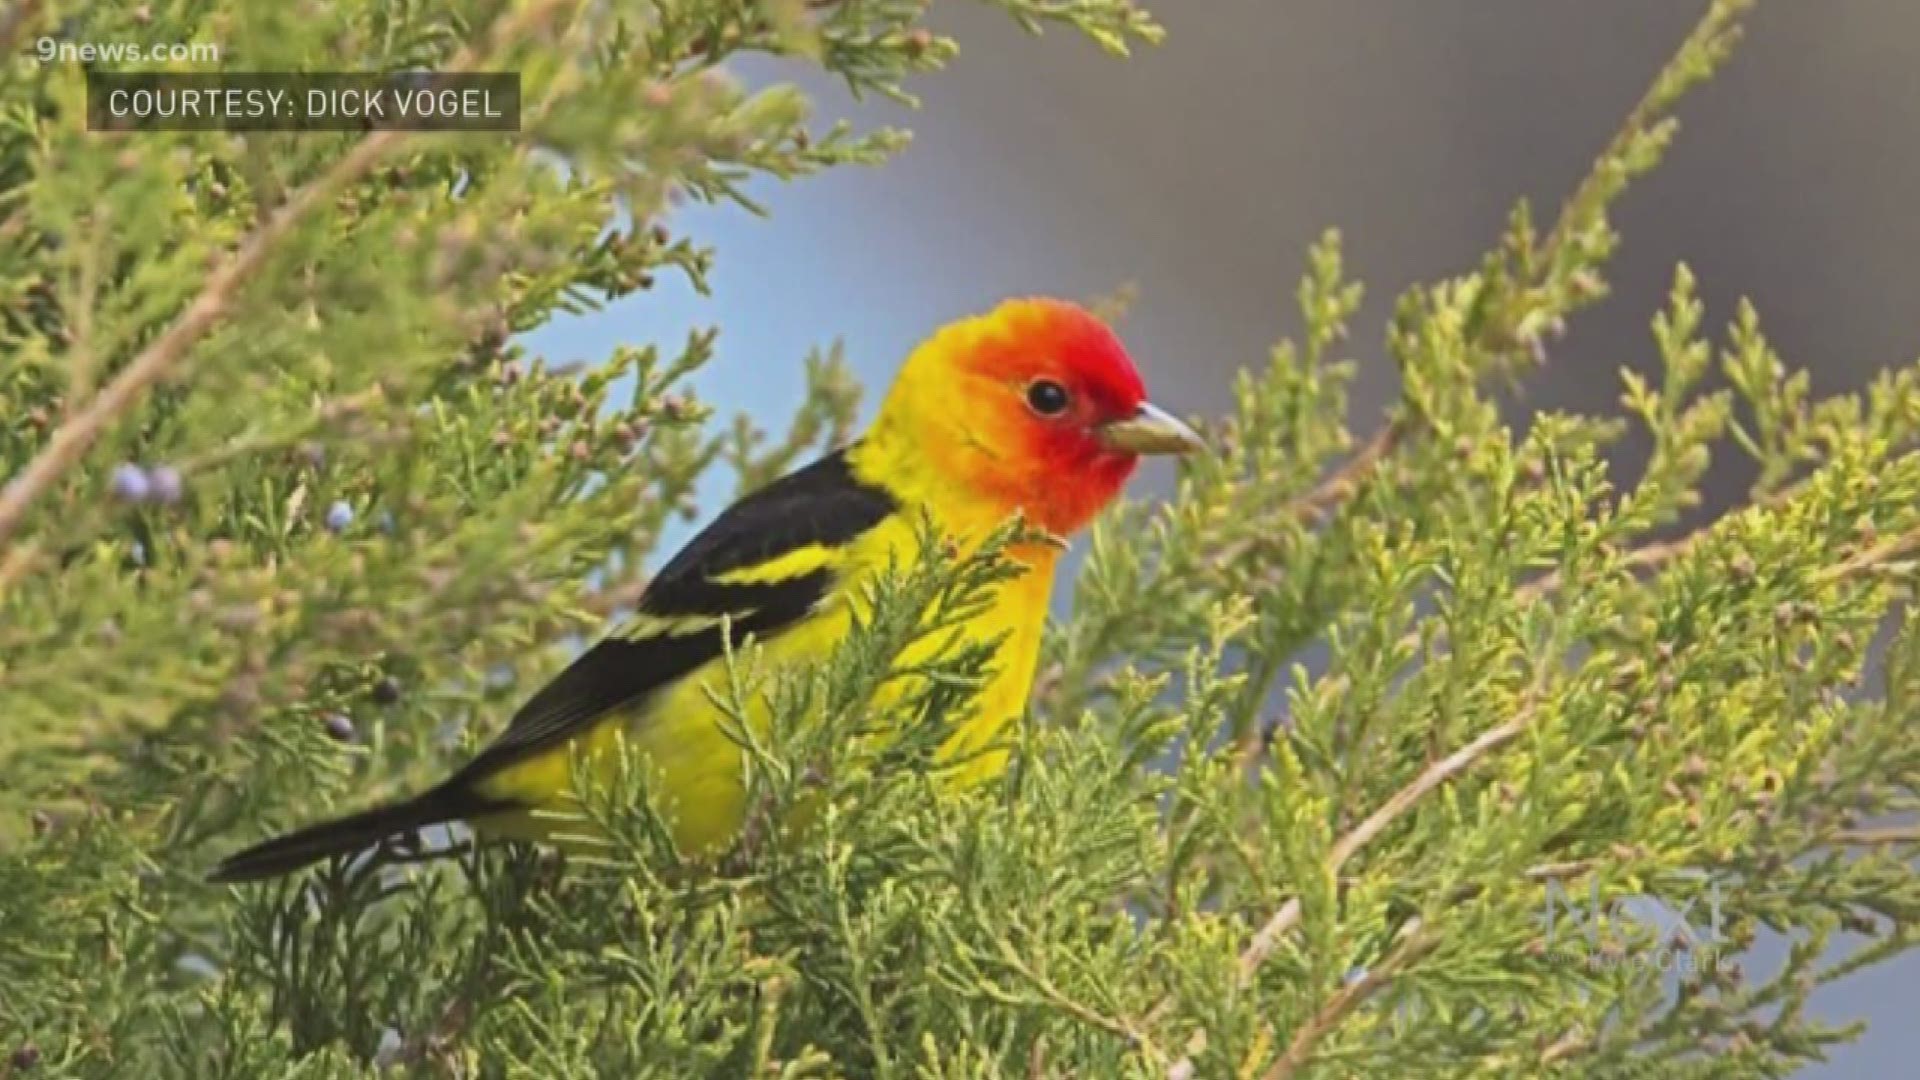 In metro Denver, bird-watchers have it good this spring. Western Tanagers are not uncommon in Colorado but are not always typical in the city. So why are people seeing them so often in their backyard right now? We asked the Denver Audubon for an explanation.